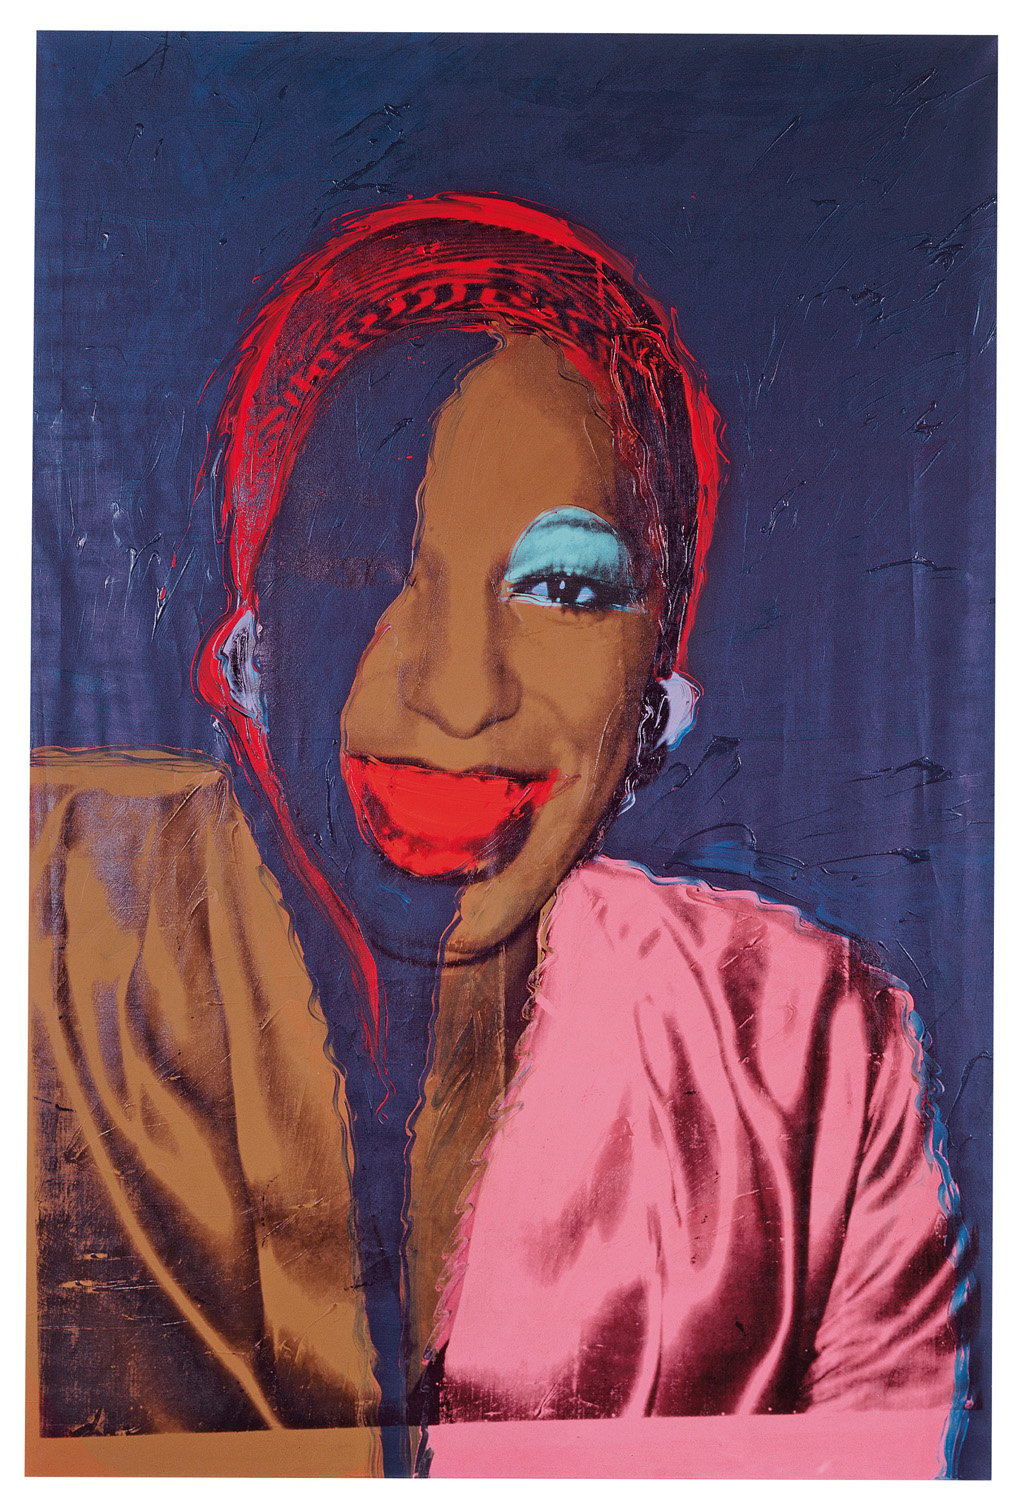 Andy Warhol (1928–1987), Ladies and Gentlemen (Wilhelmina Ross), 1975. Acrylic and silkscreen ink on linen, 304.8 x 203.2 cm. Fondation Louis Vuitton, Paris © The Andy Warhol Foundation for the Visual Arts, Inc. / Artists Rights Society (ARS) New York